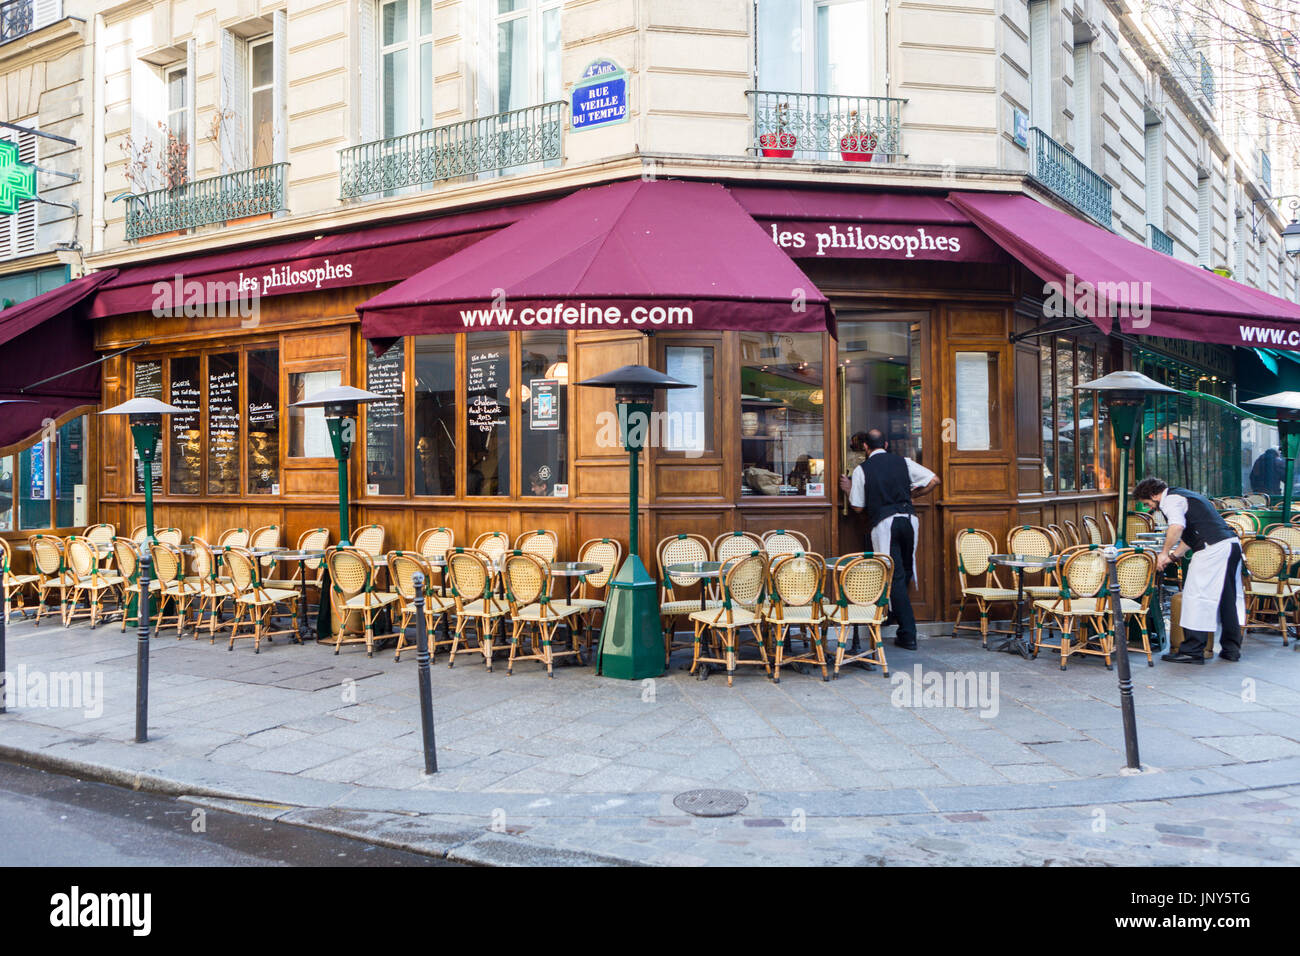 Paris, France - February 29, 2016: Waiters outside the Les Philosophes cafe on rue Vieille du Temple in the Marais, Paris, getting ready for the day. Stock Photo